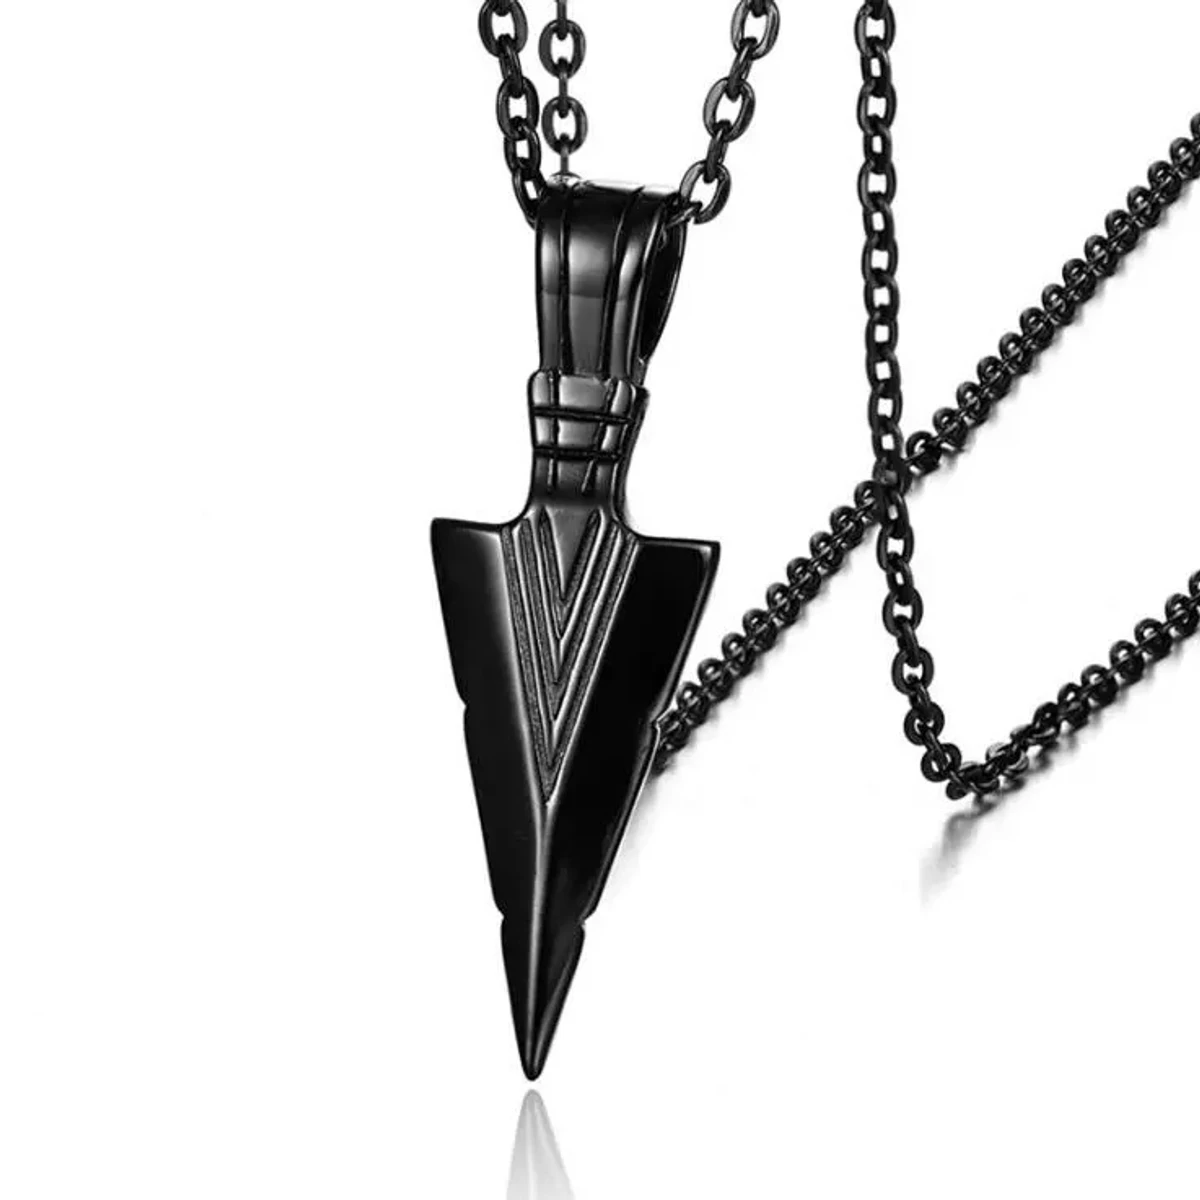 Stunning Stainless Steel Arrowhead New Necklace For Men